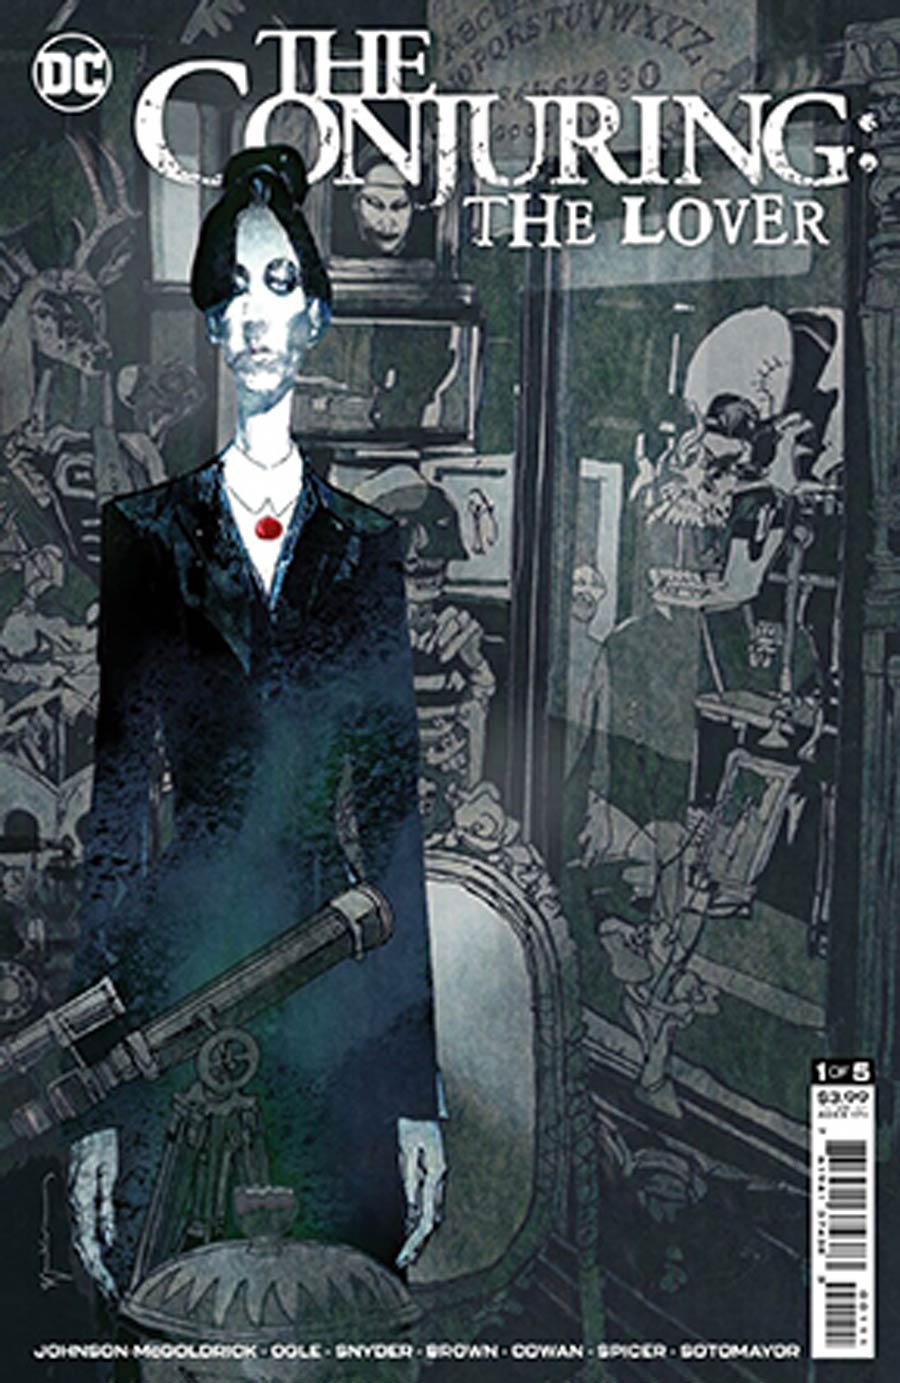 DC Horror Presents The Conjuring The Lover #1 Cover E DF Signed By Scott Snyder